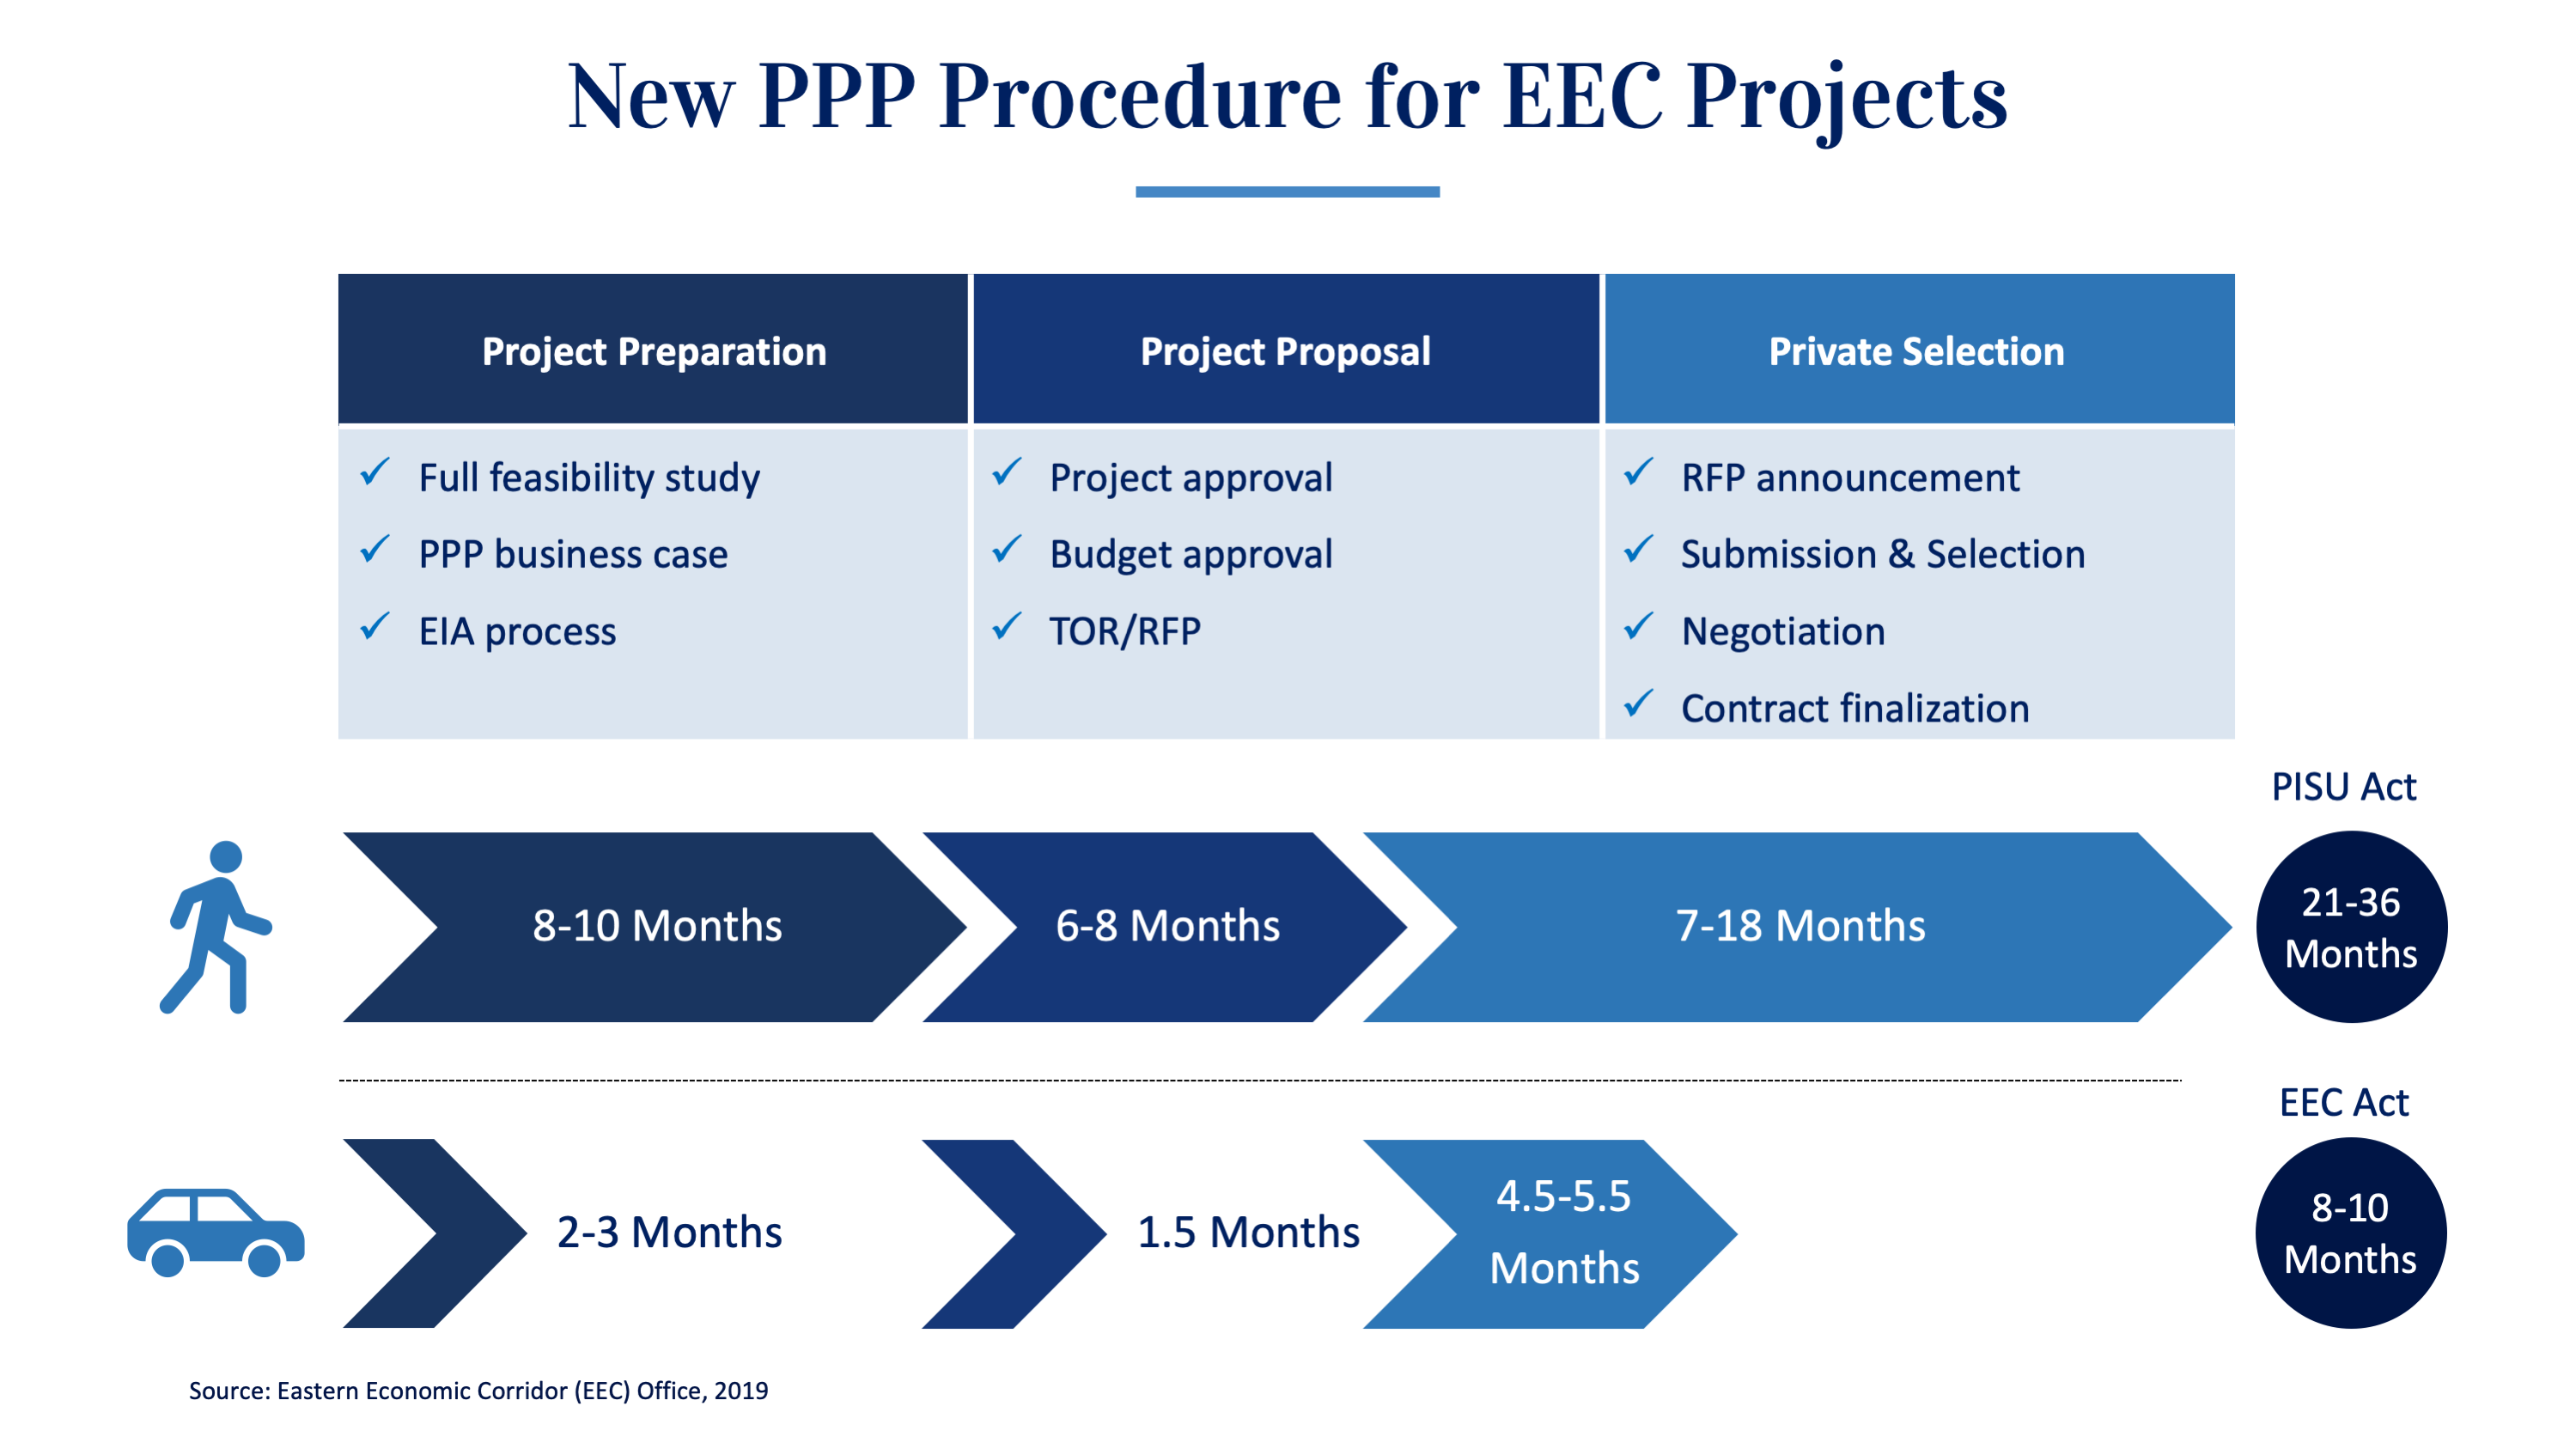 New PPP Procedure for EEC Projects